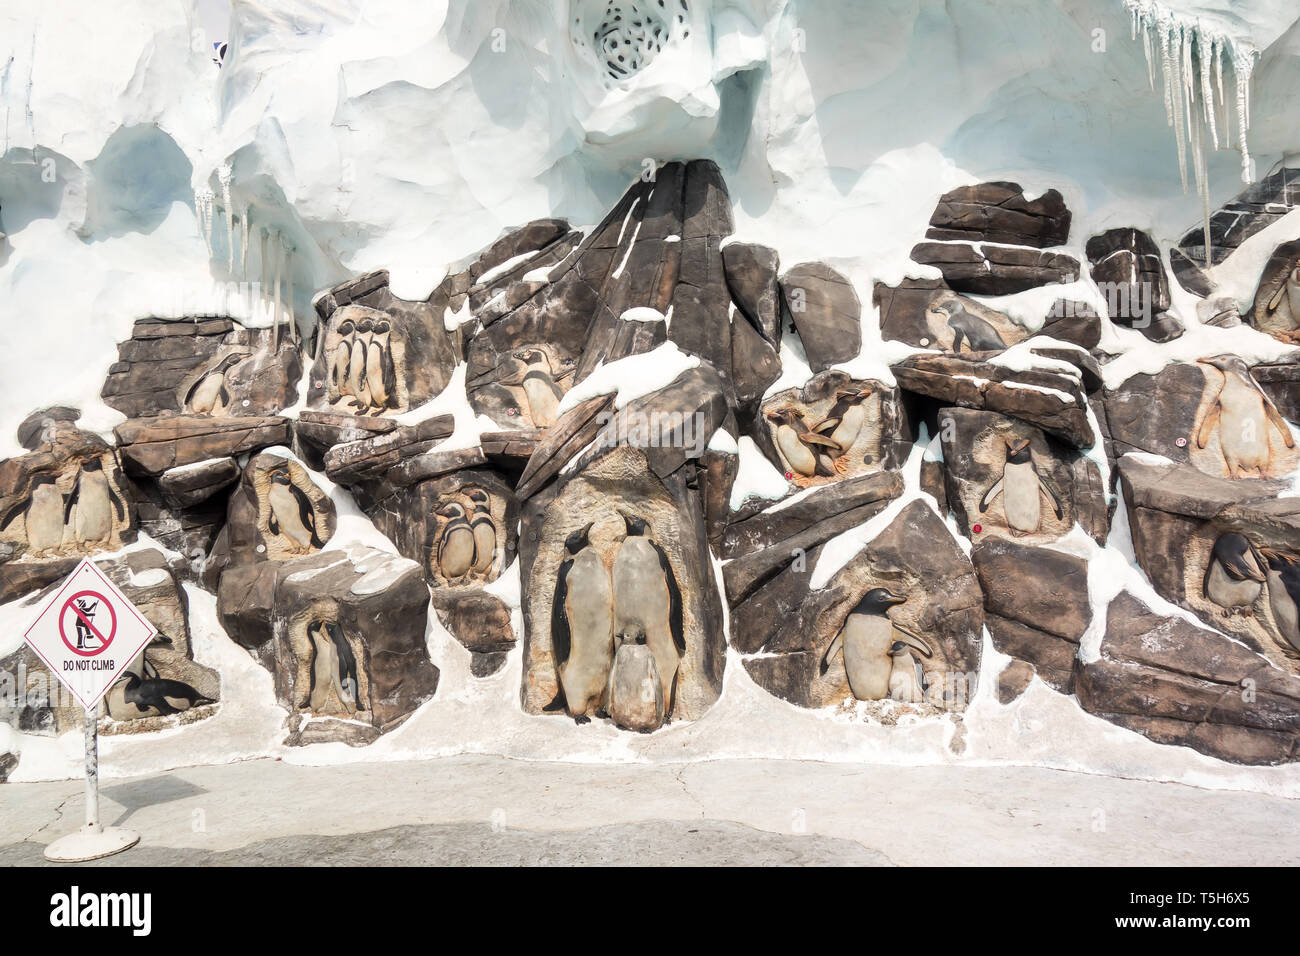 Creative artwork of penguins that has been curved into rocks as a welcome sign to tourists who visit the Antarctica: Empire of the Penguin at Seaworld Stock Photo